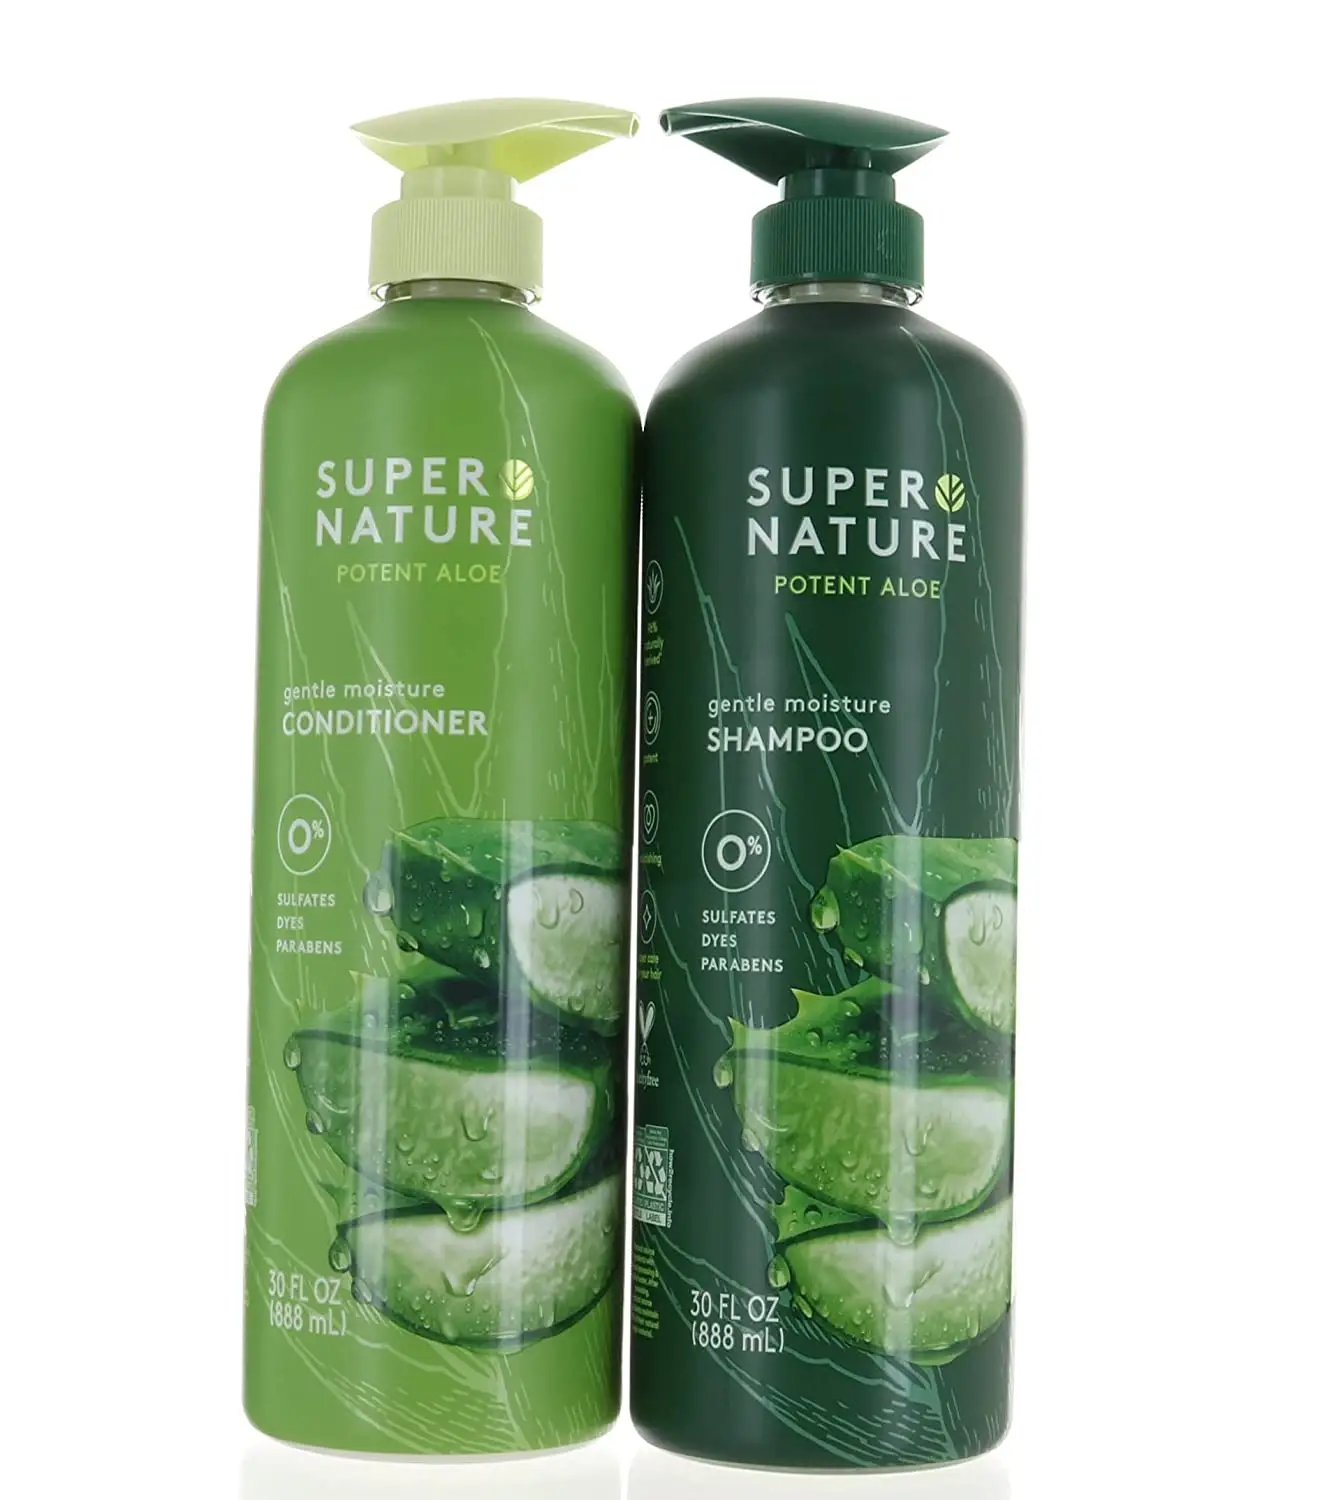 You are currently viewing Super Nature Potent Aloe Shampoo Review – Is It Legit?